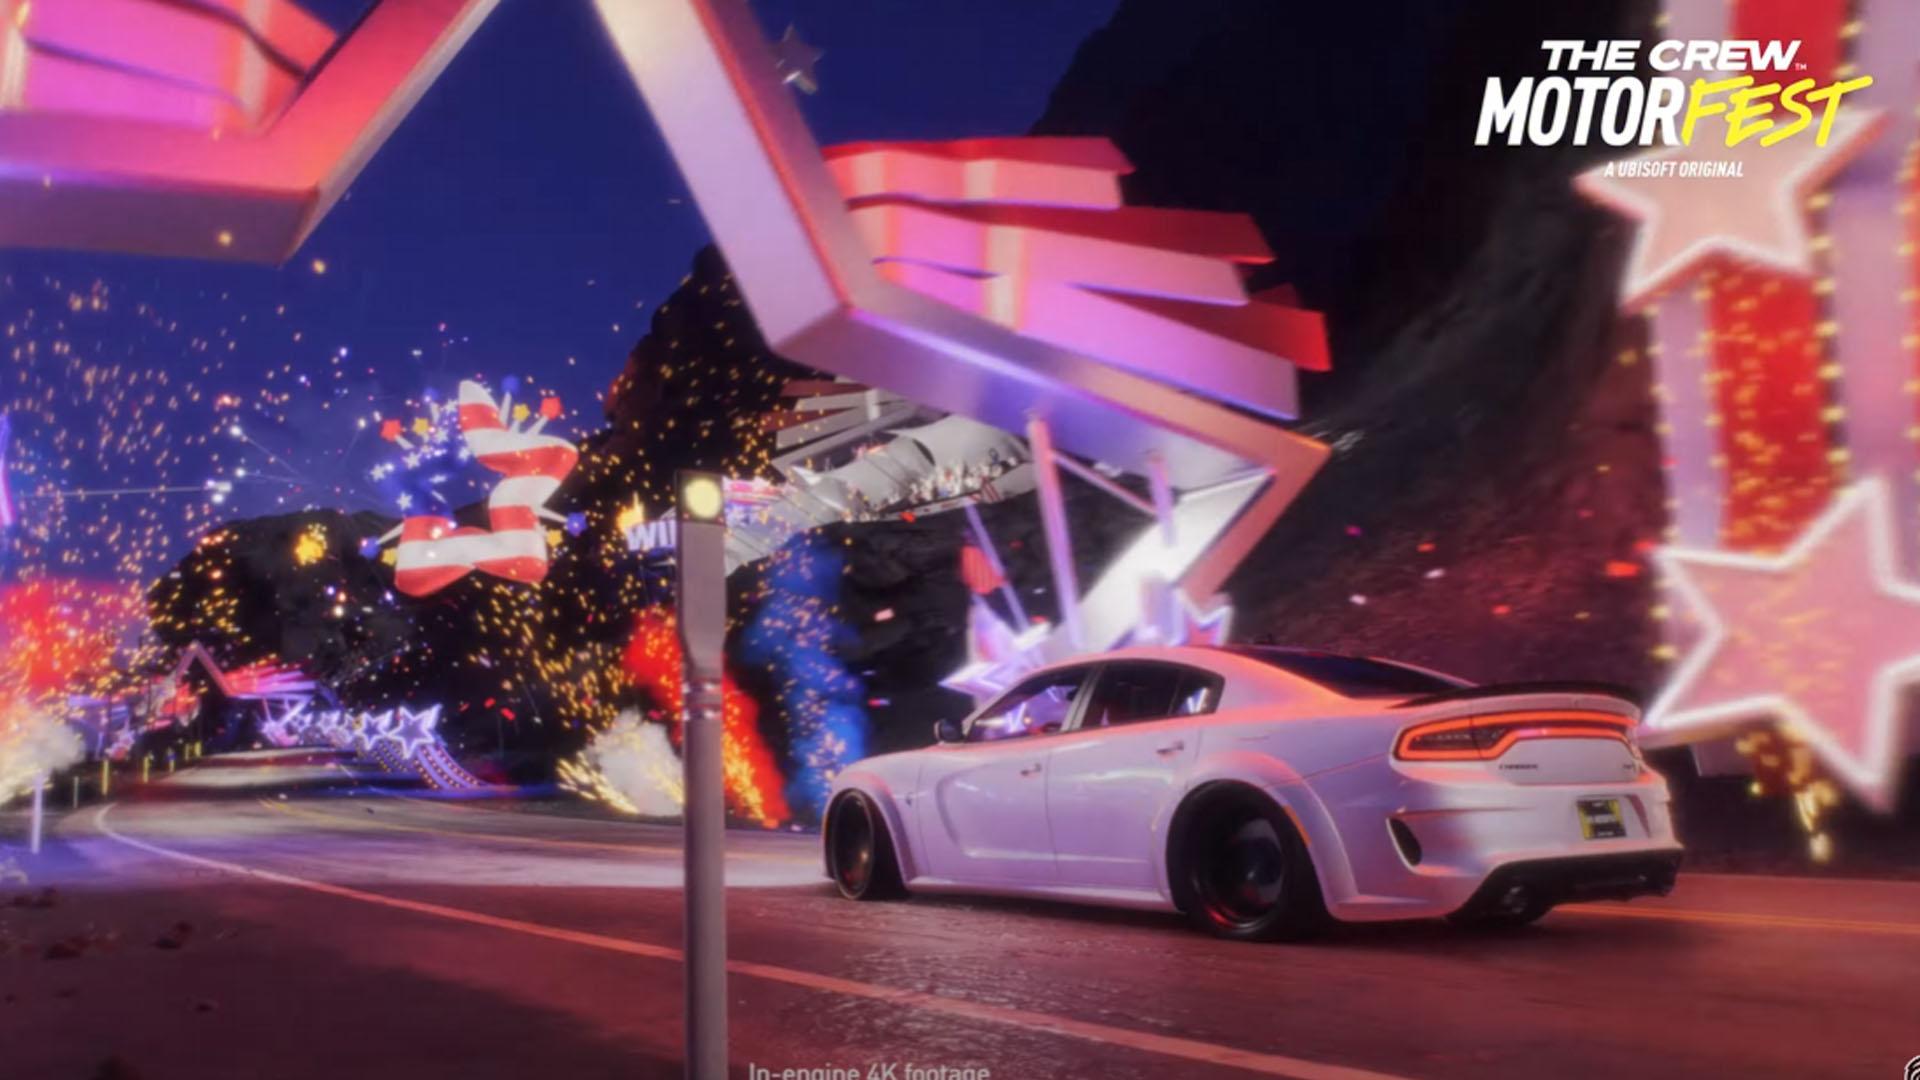 Buy The Crew Motorfest - Available Day 1 on Ubisoft+